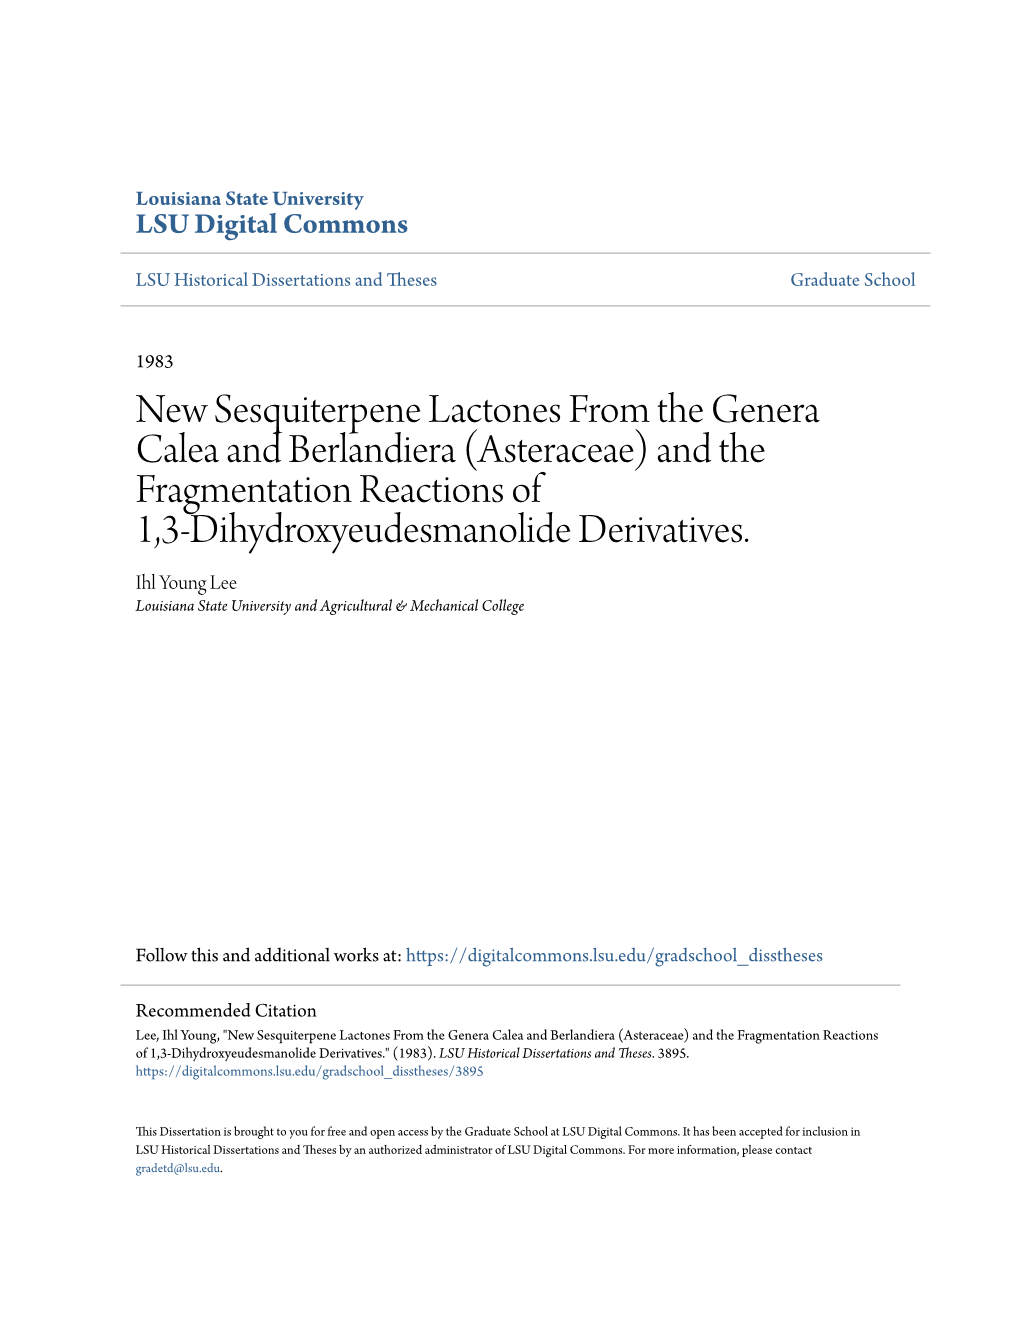 New Sesquiterpene Lactones from the Genera Calea and Berlandiera (Asteraceae) and the Fragmentation Reactions of 1,3-Dihydroxyeudesmanolide Derivatives